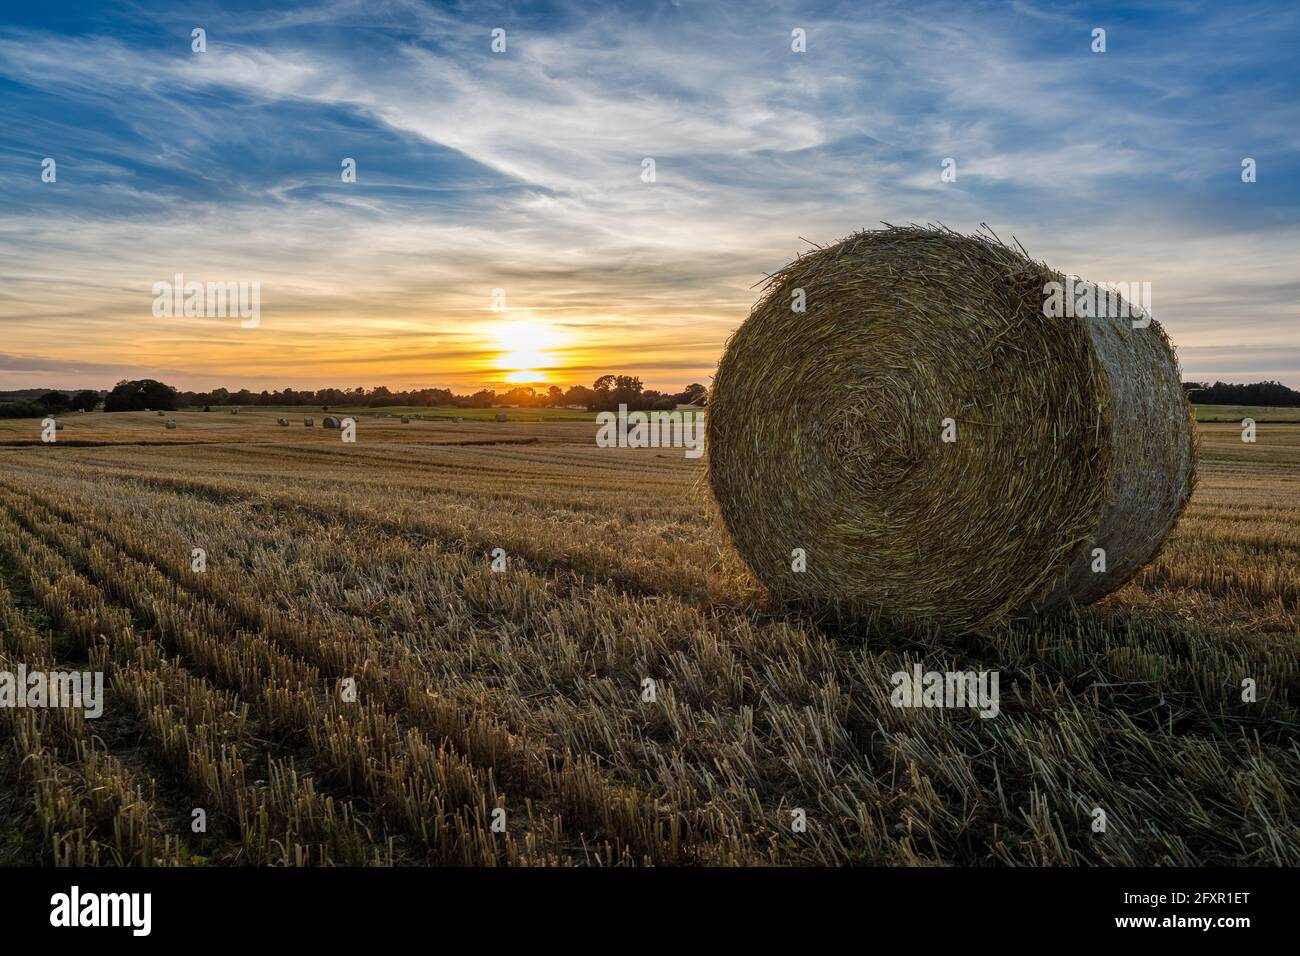 An agricultural field at sunset in Denmark Stock Photo